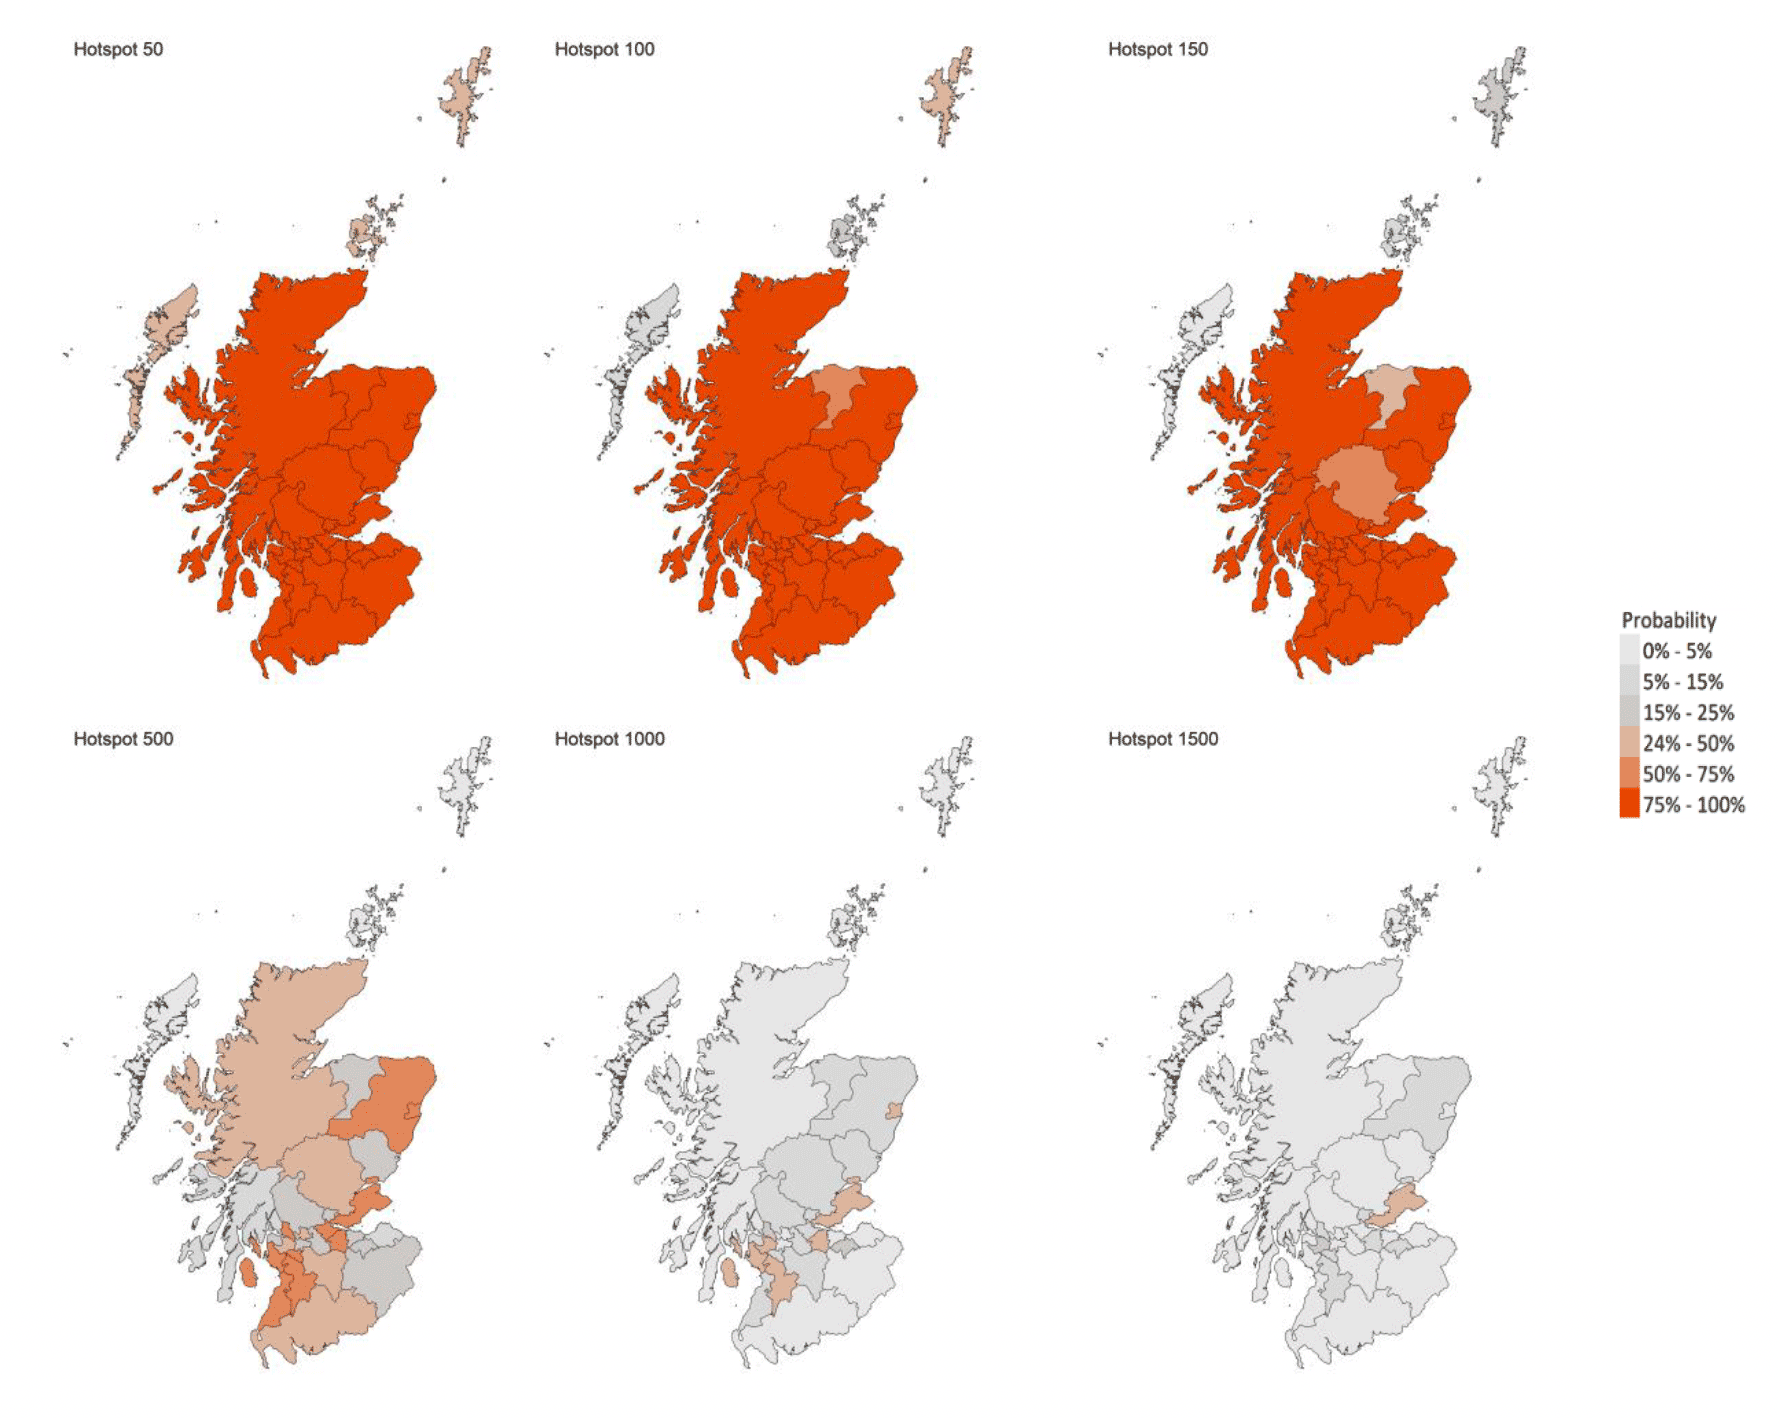 These six colour coded maps of Scotland show the probability of Local Authorities having more than 50, more than 100, more than 300, more than 500, more than 1,000 and more than 1,500 cases per 100,000 population. The colours range from very light grey for a 0 to 5 percent probability, through medium grey, dark grey, light orange, medium orange to dark orange for a 75 to 100 percent probability. 

These maps show that there are 29 local authorities that have at least a 75% probability of exceeding 50 cases per 100,000 population. Of those, 13 are expected to exceed 300 cases per 100,000 with at least a 75% probability. These are East Ayrshire, East Dunbartonshire, East Renfrewshire, Fife, Glasgow City, Inverclyde, North Ayrshire, North Lanarkshire, Renfrewshire, South Ayrshire, South Lanarkshire, West Dunbartonshire and West Lothian. No local authorities are expected to exceed 500 cases per 100,000 with a 75% probability. 
